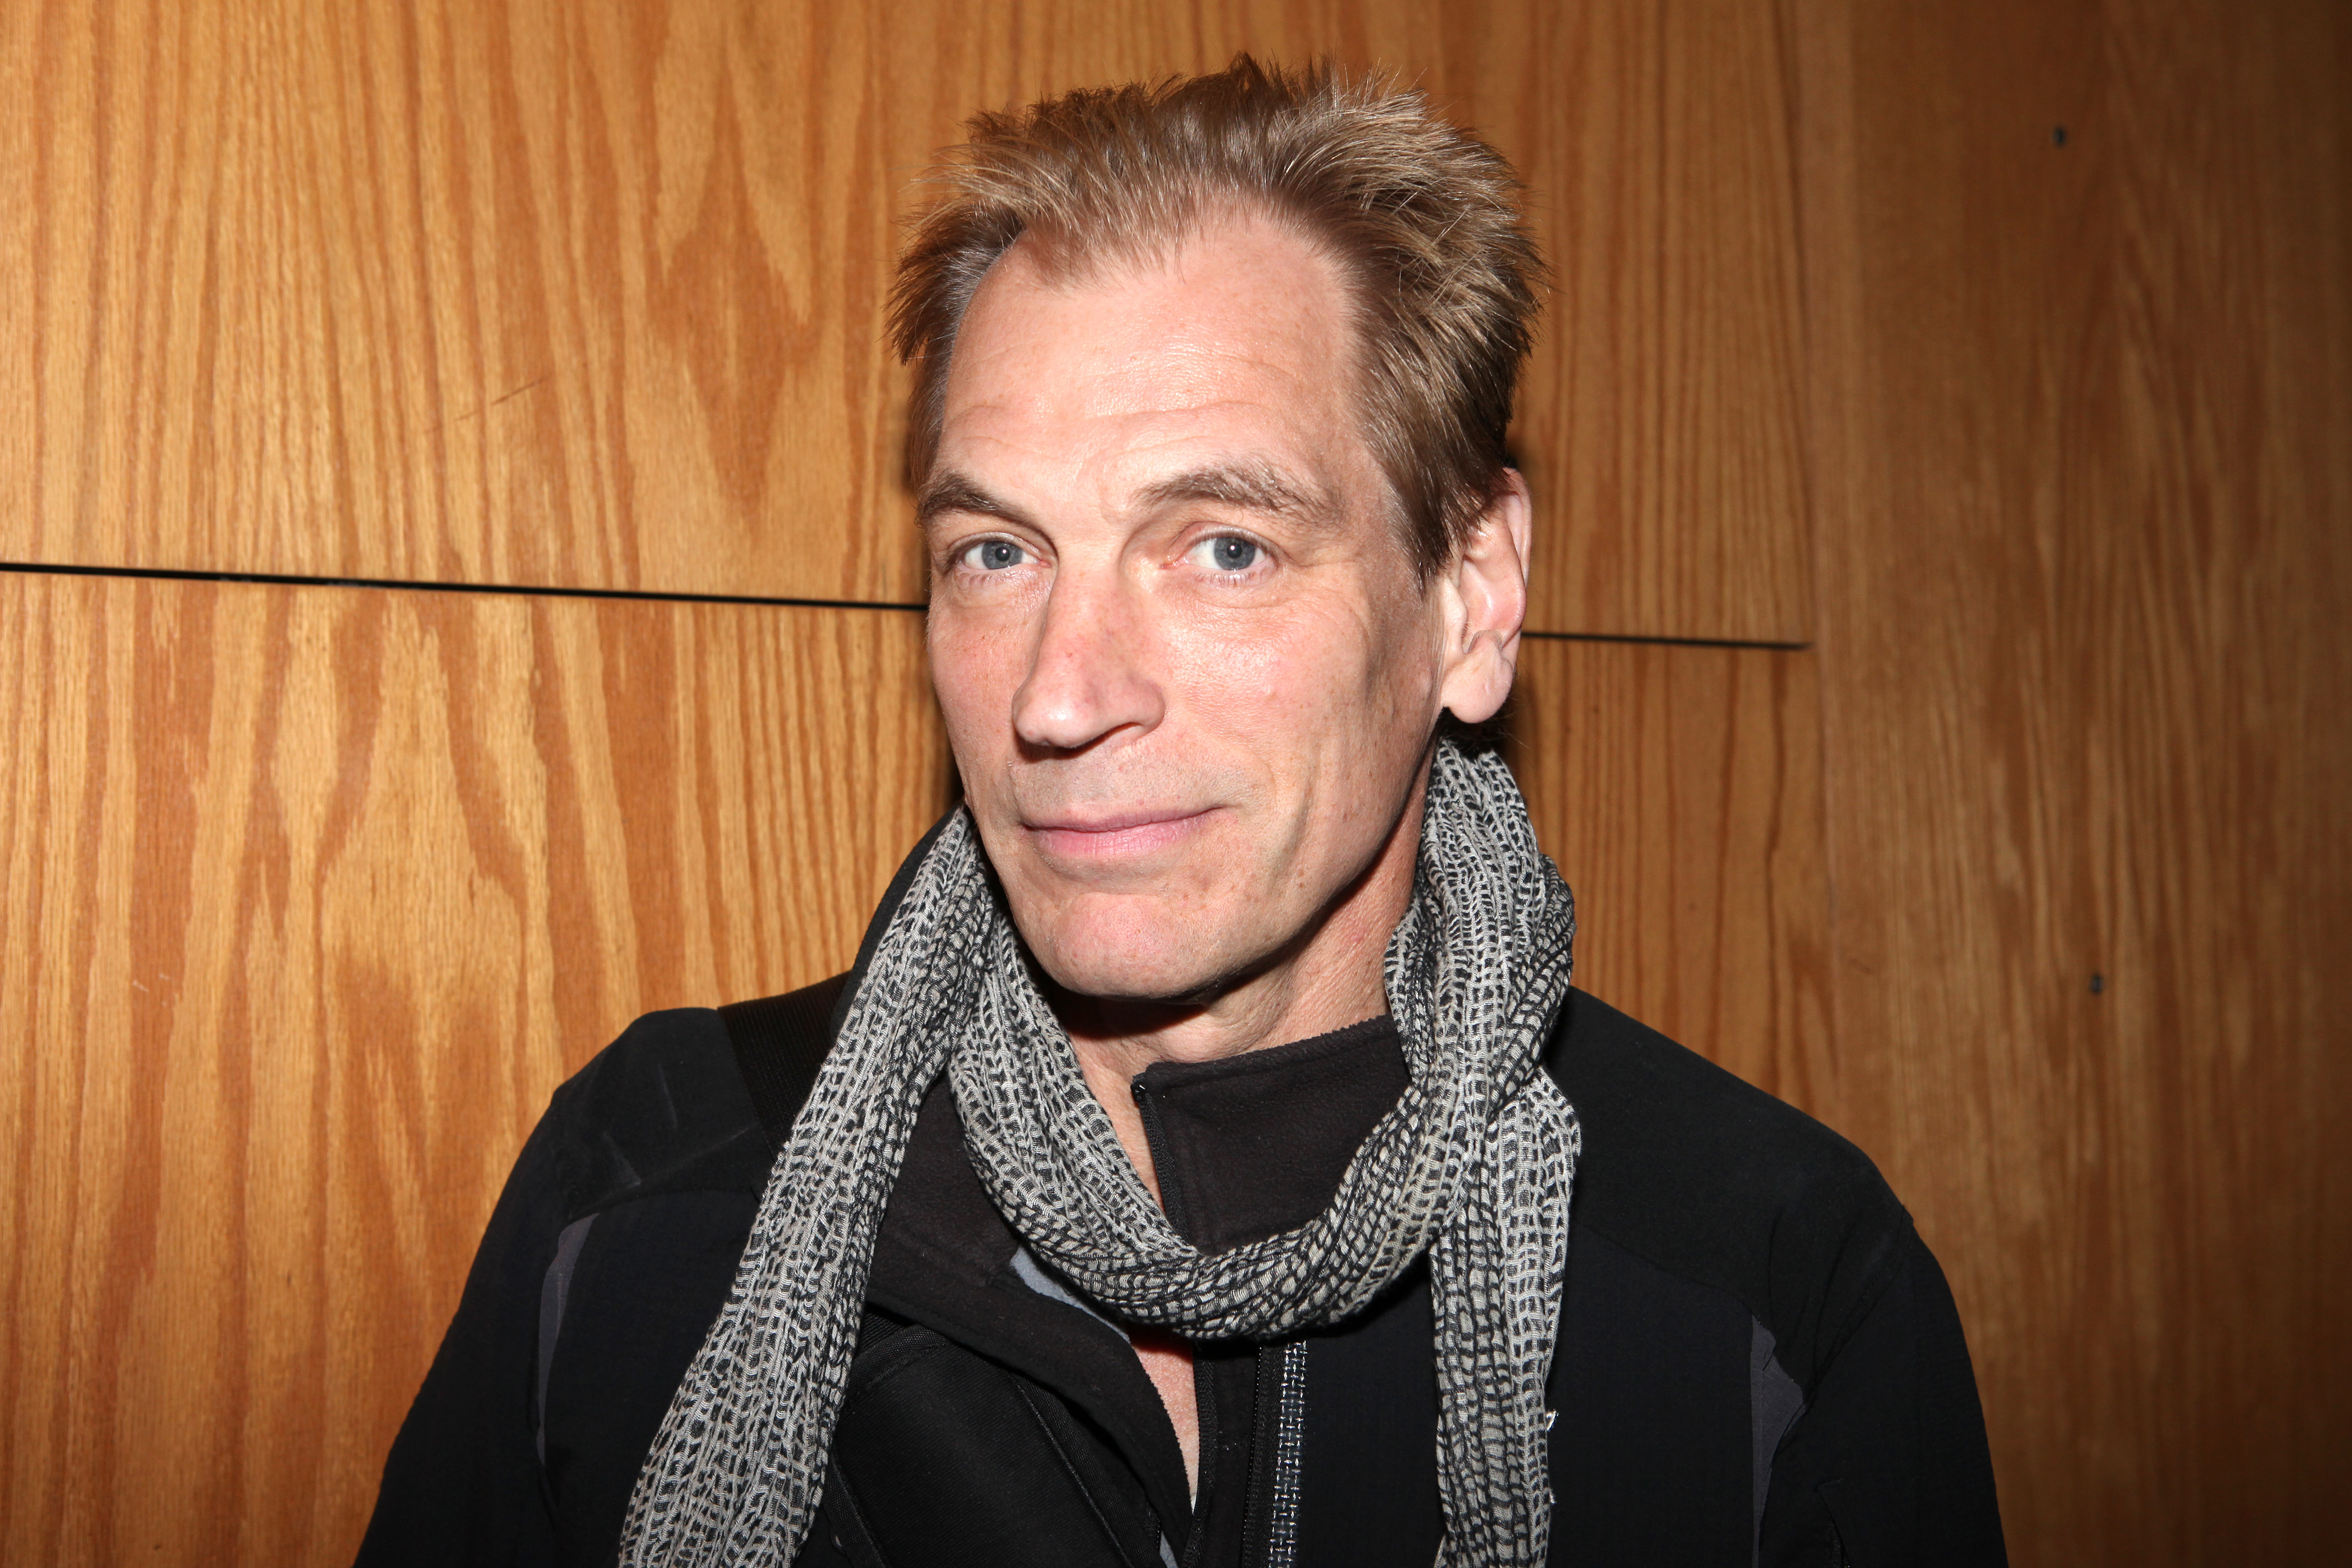 Julian Sands at the "Checkers" opening celebration in 2012 | Source: Getty Images